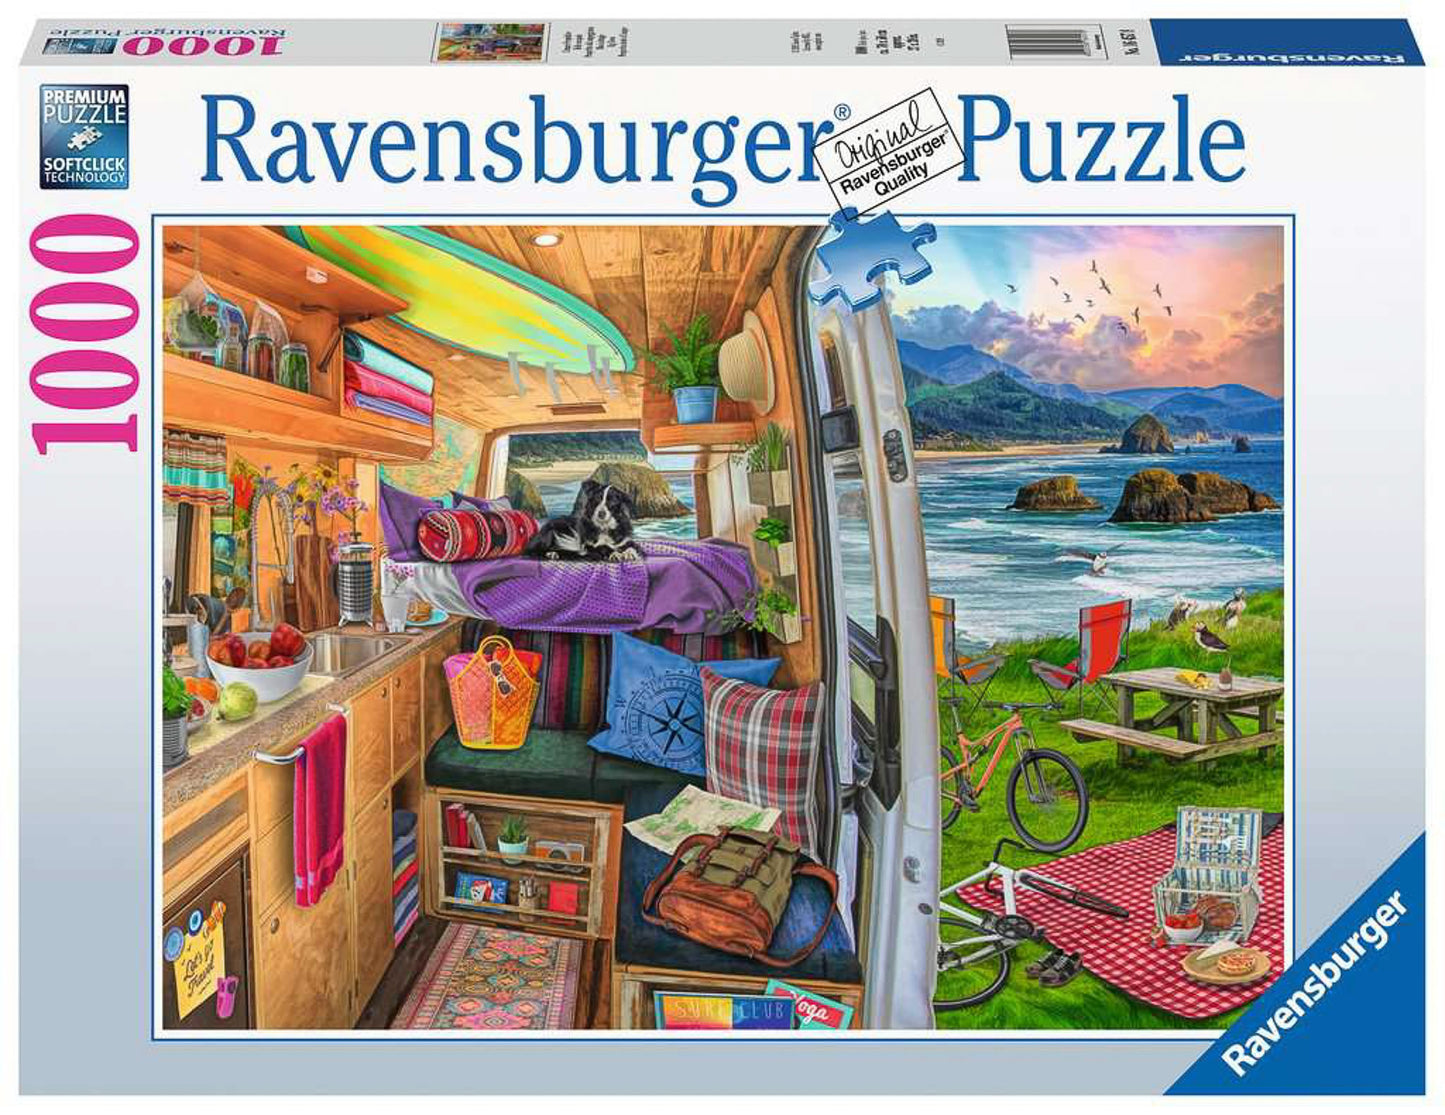 Ravensburger Rig Views 1000 Piece Jigsaw Puzzle High Quality Buy or Rent